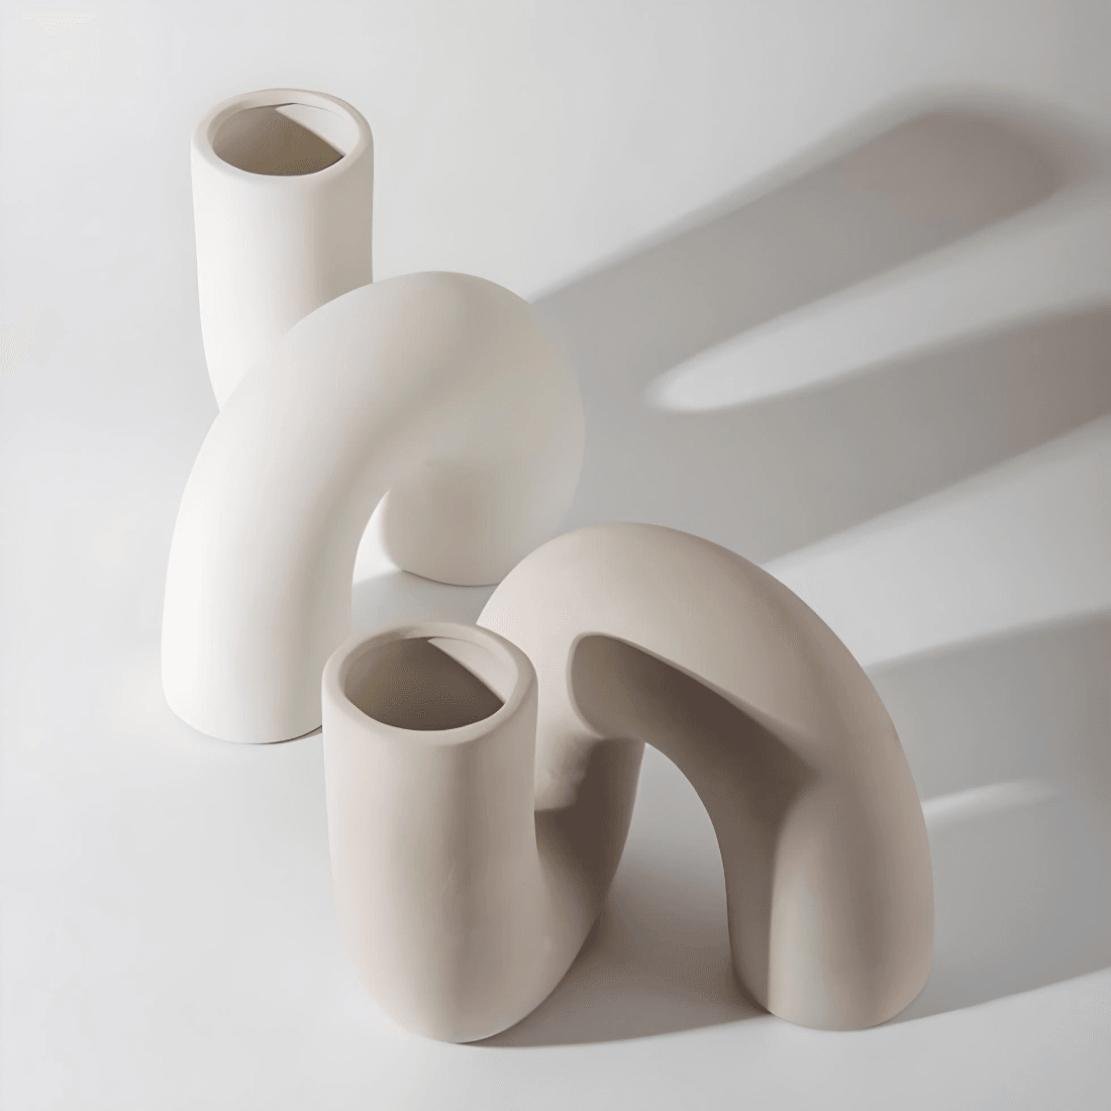 Two ceramic twist vases in white and beige